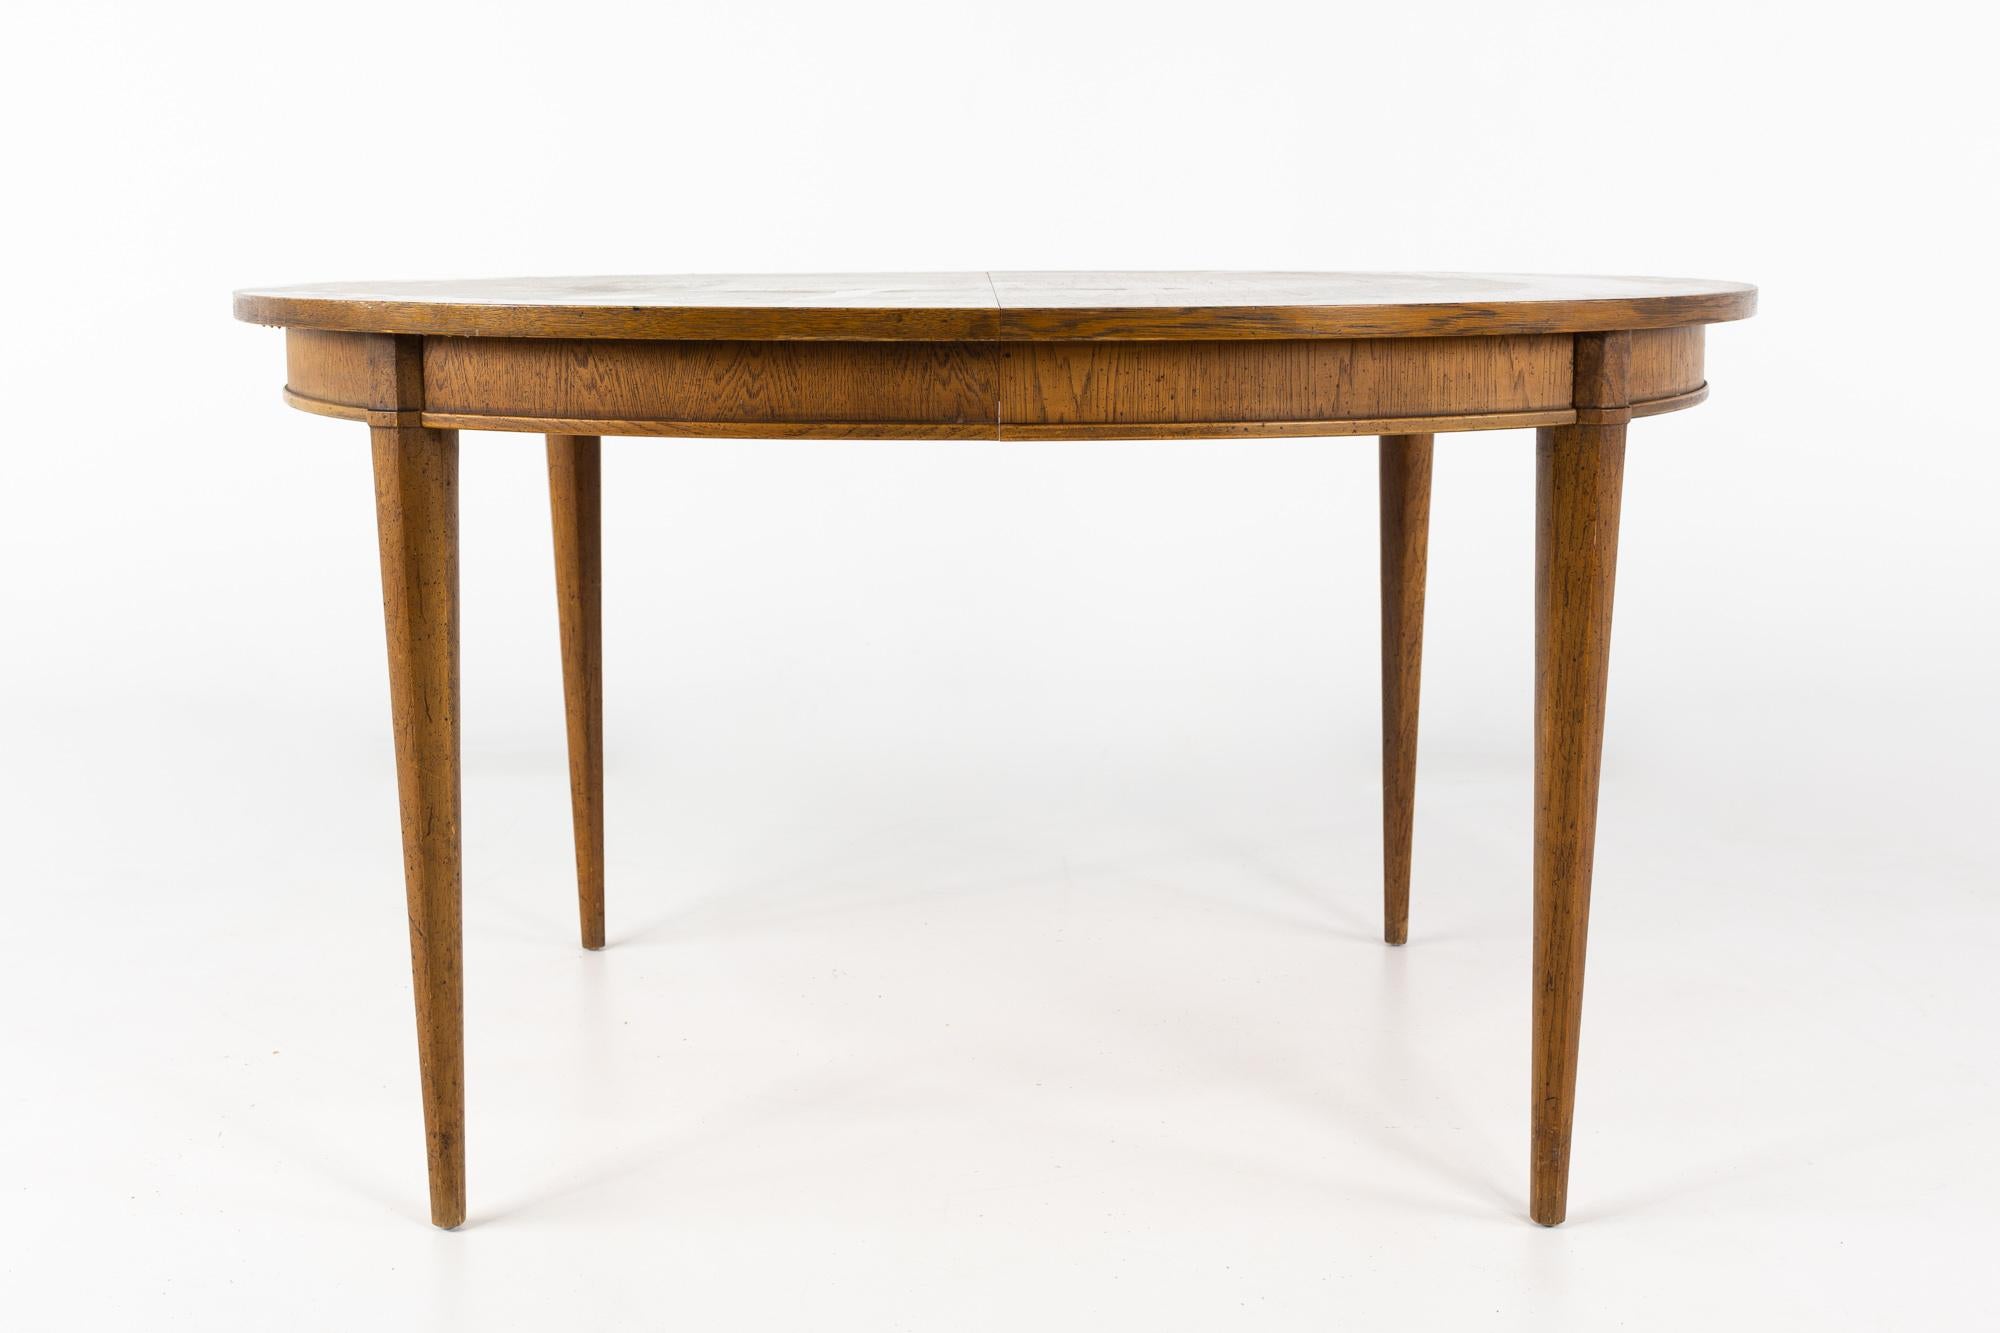 Lane First Edition Style Mid Century walnut dining table with 2 Leaves

This table measures: 53 wide x 45 deep x 29.5 inches high, with a chair clearance of 25.5 inches, each leaf measures 20 inches wide, making the maximum table width of 93